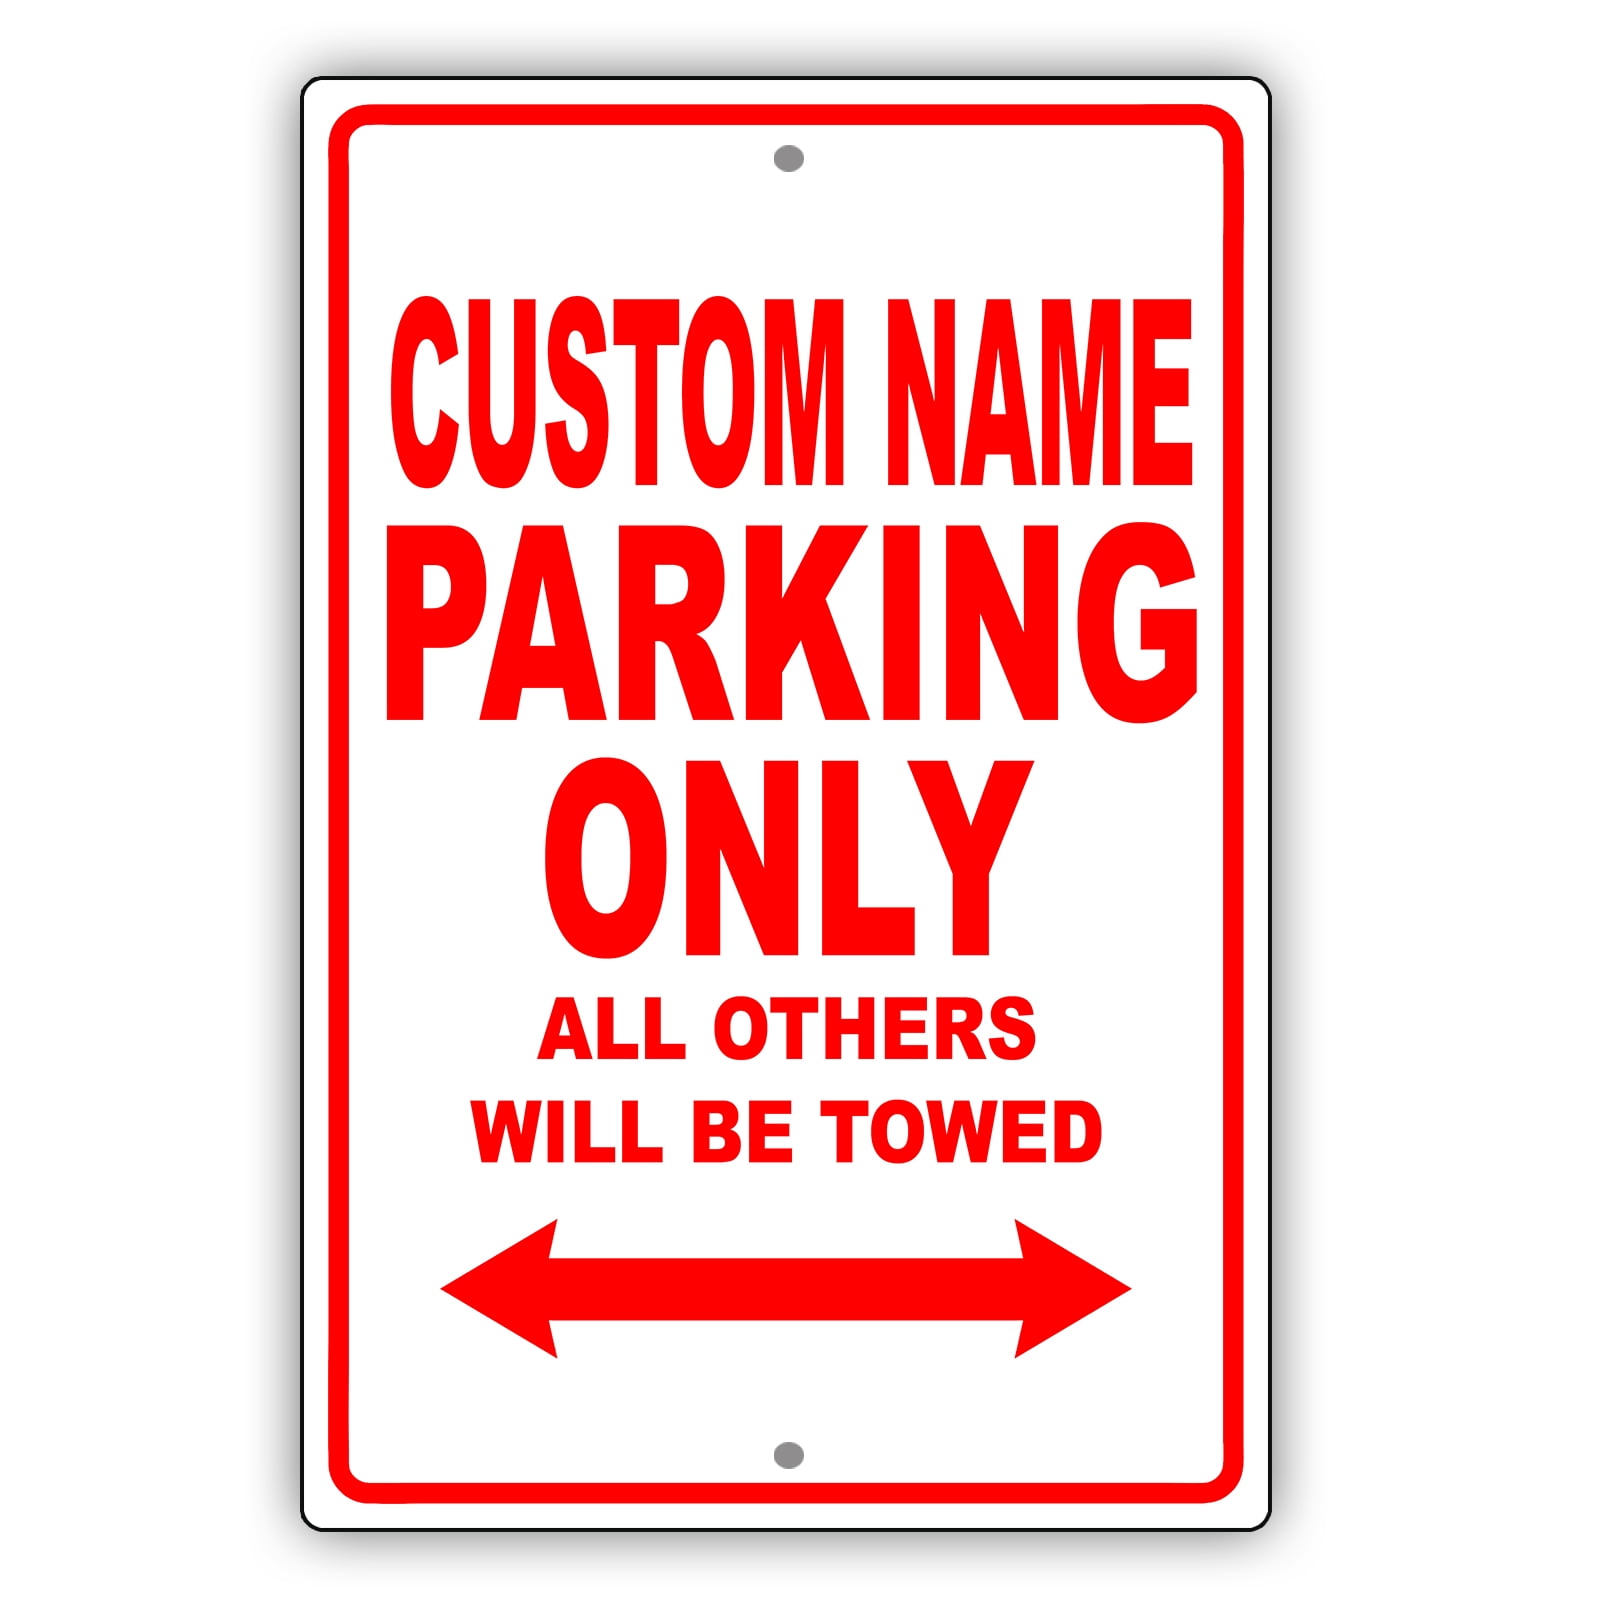 Motorcycle and Compact Car Parking Only 8"x12" Aluminum Sign Made in USA Red 